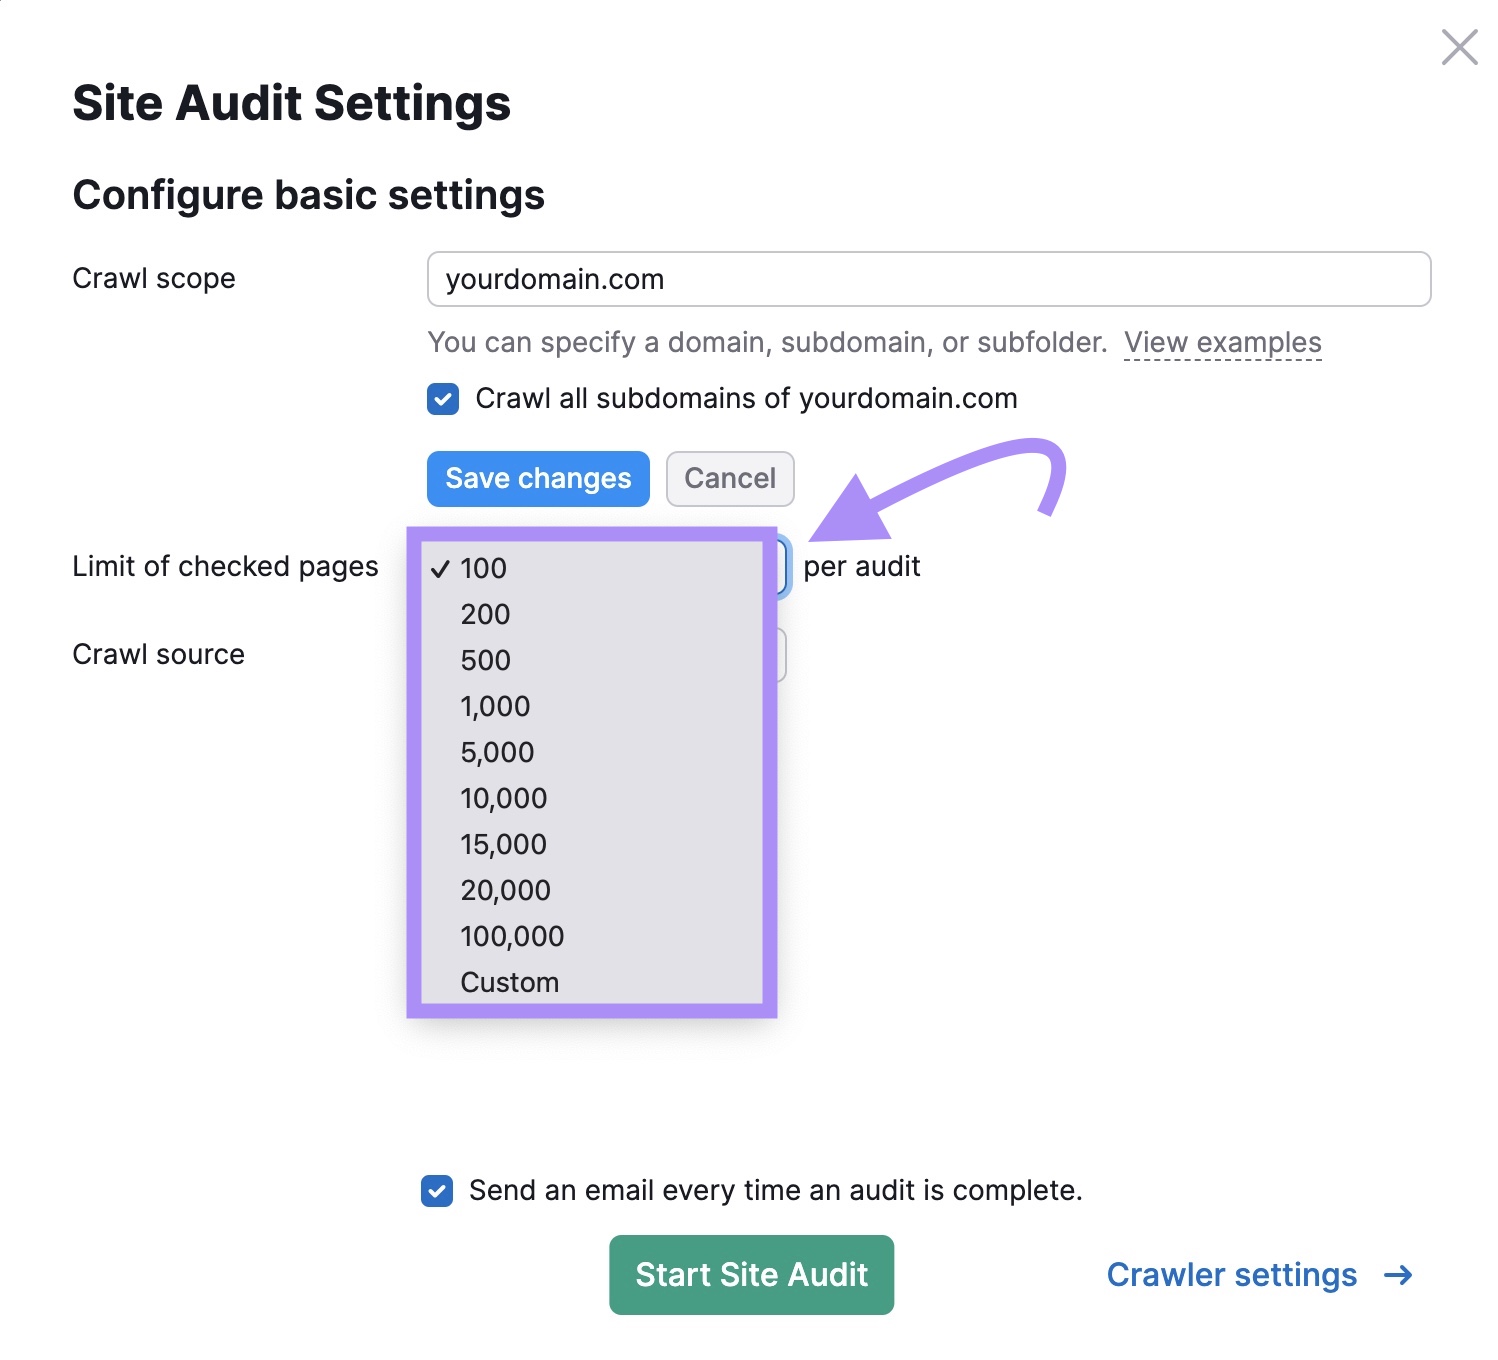 Select the number of pages to crawl in Site Audit tool settings